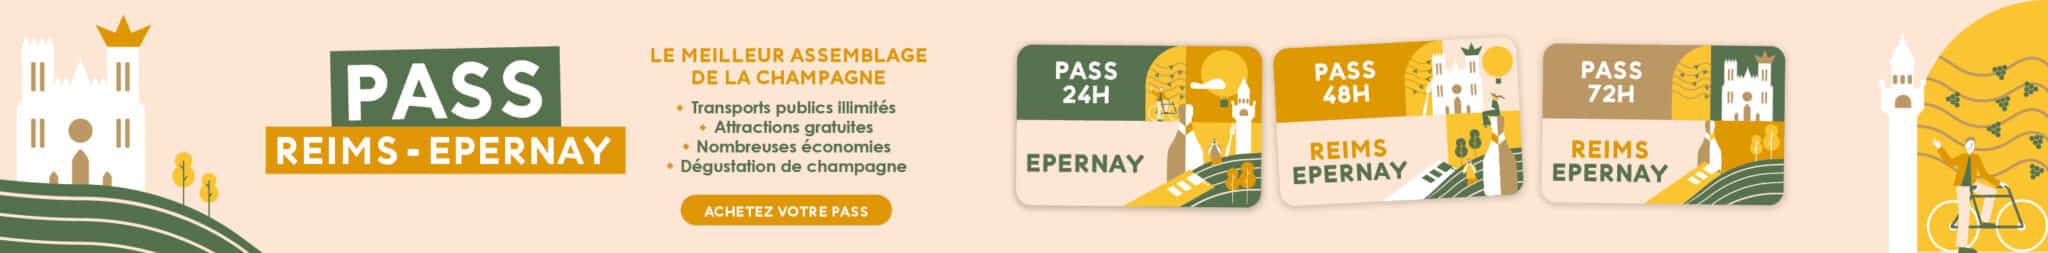 Pass Reims - Epernay